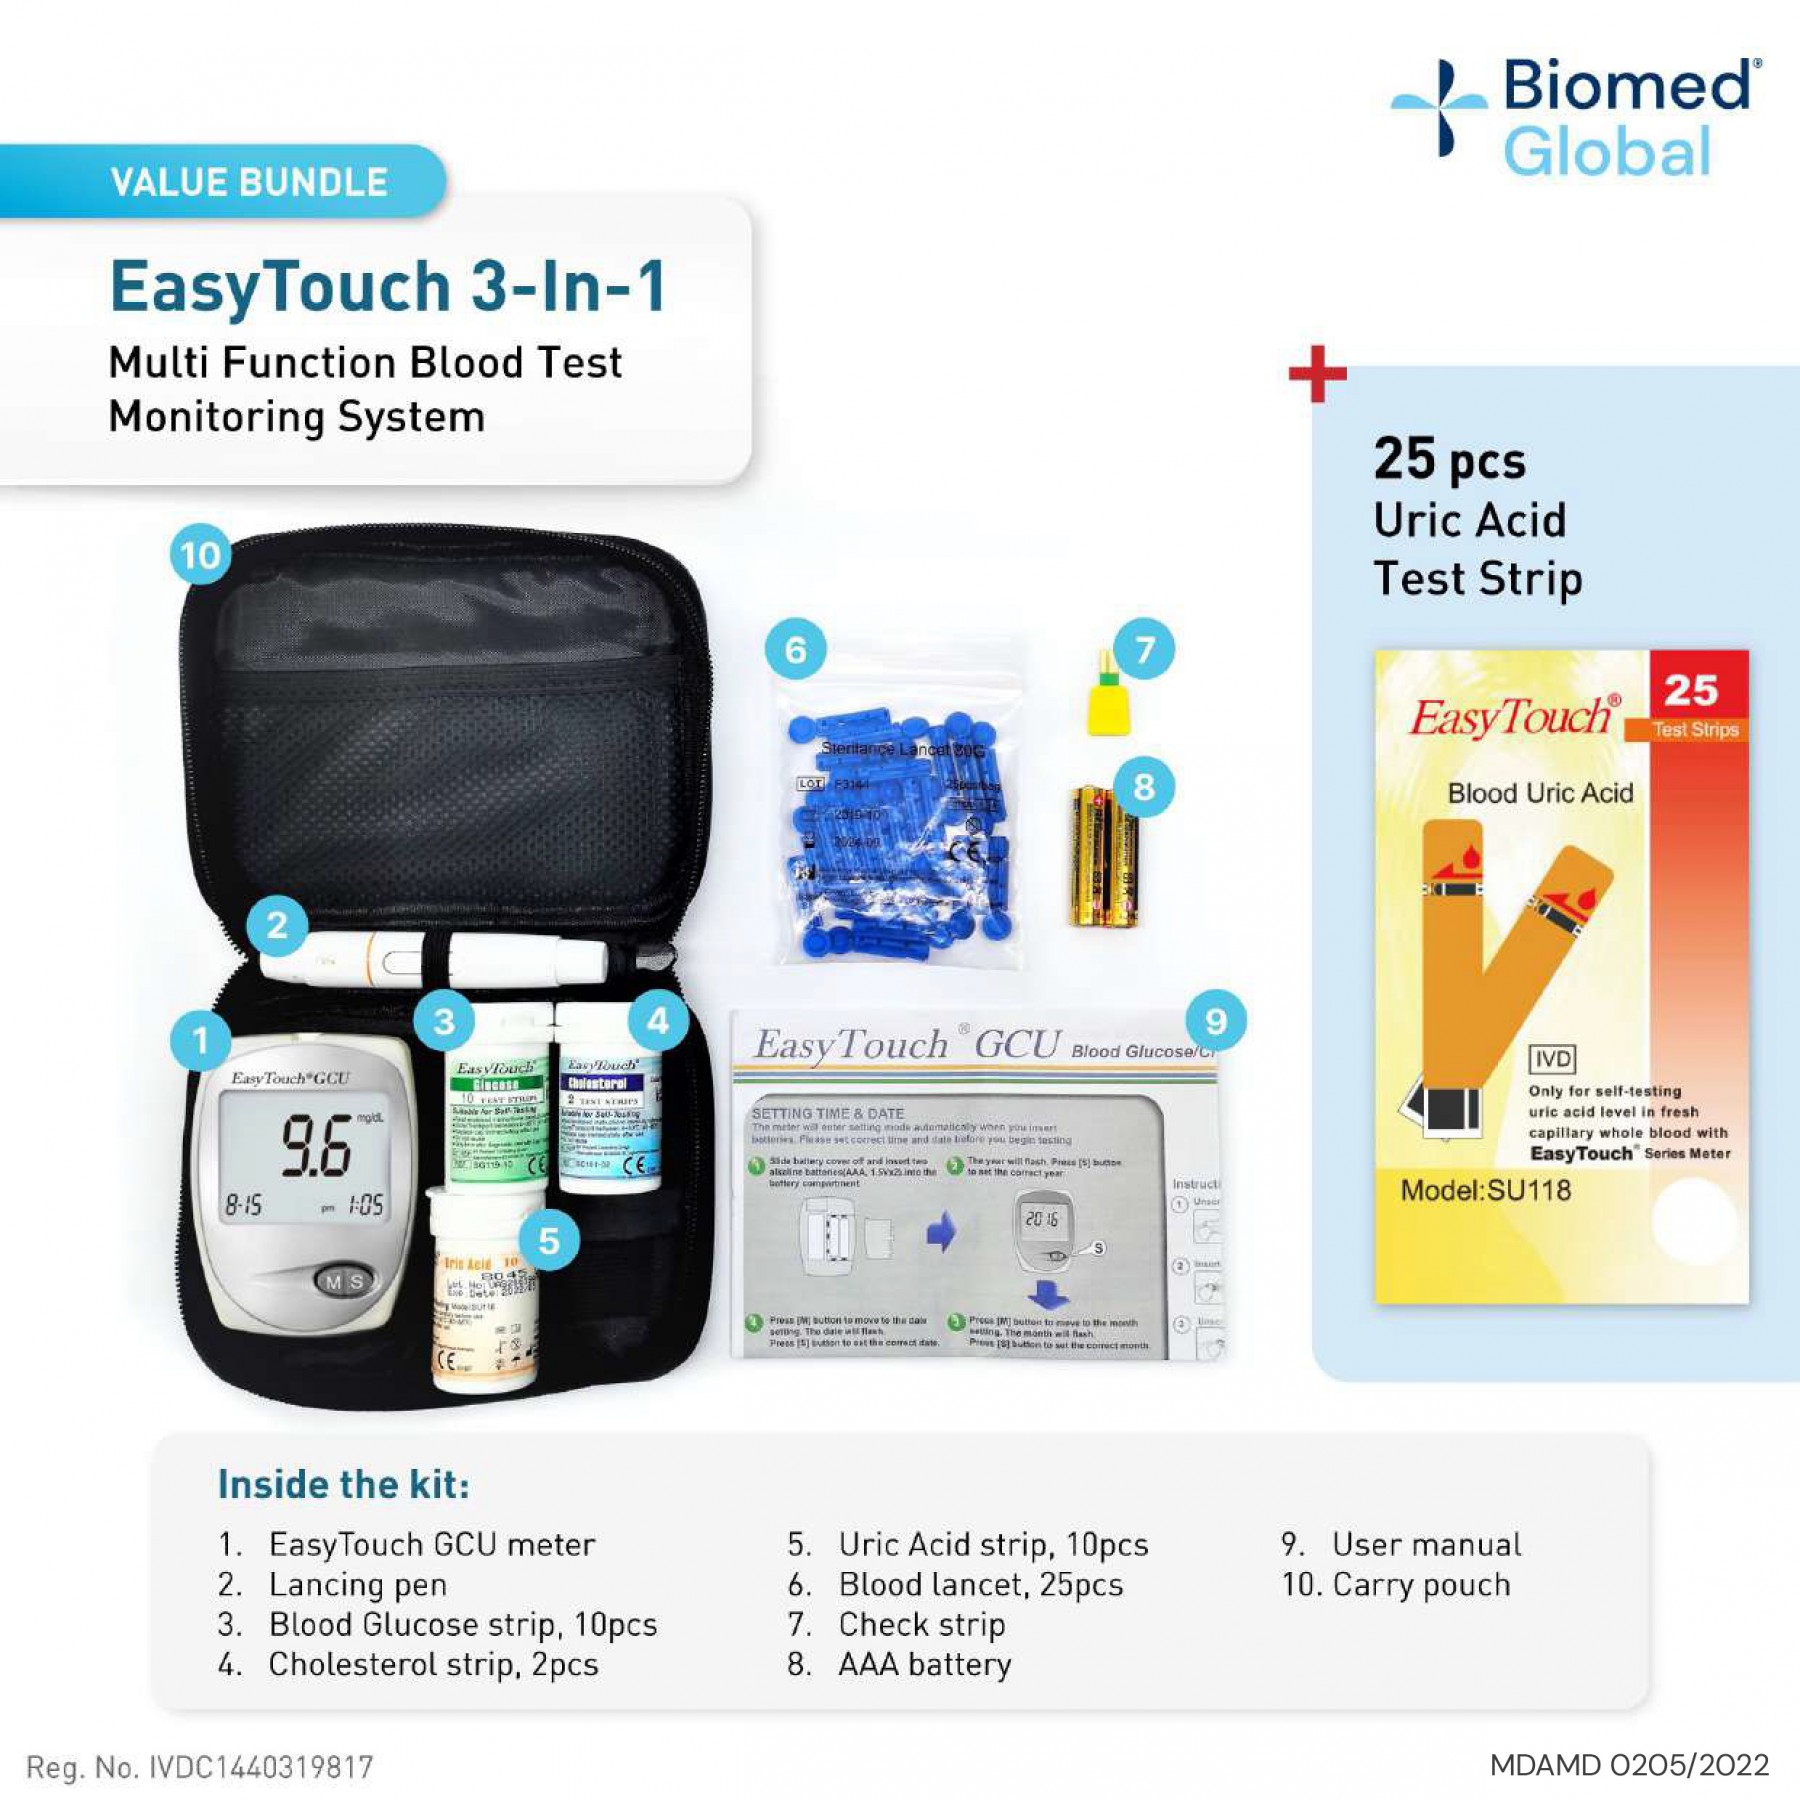 EasyTouch GCU 3-in-1 Blood Glucose, Cholesterol and Uric Acid Meter, FREE with 25 Uric Acid Test Strips (BUNDLE PACK)